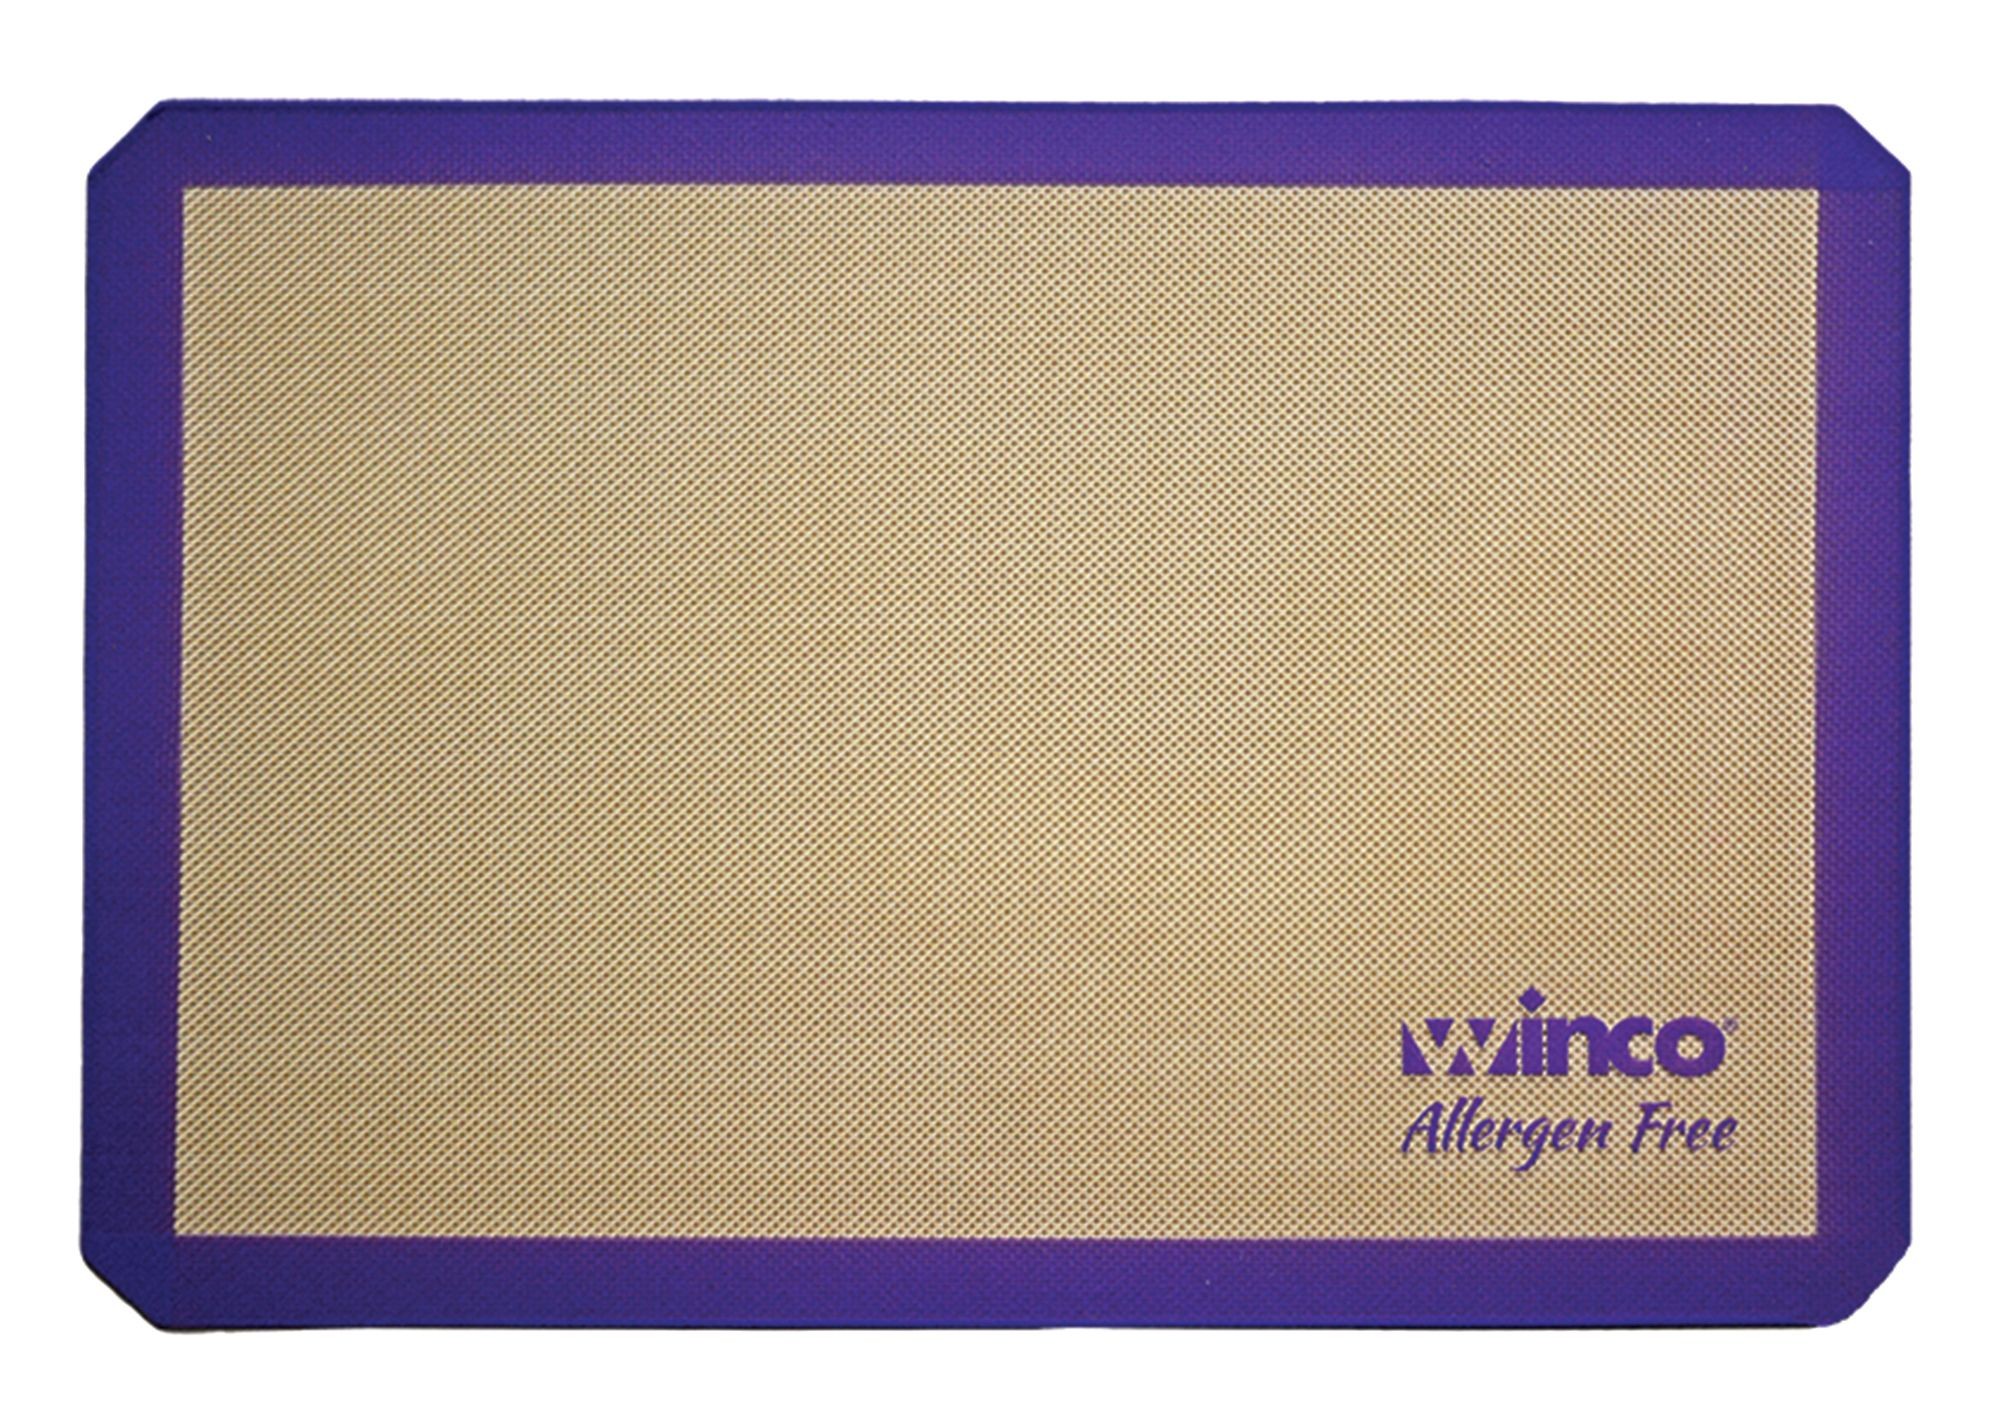 Winco SBS-24PP Full Size Allergen Free 16-3/8" x 24-1/2" Silicone Baking Mat